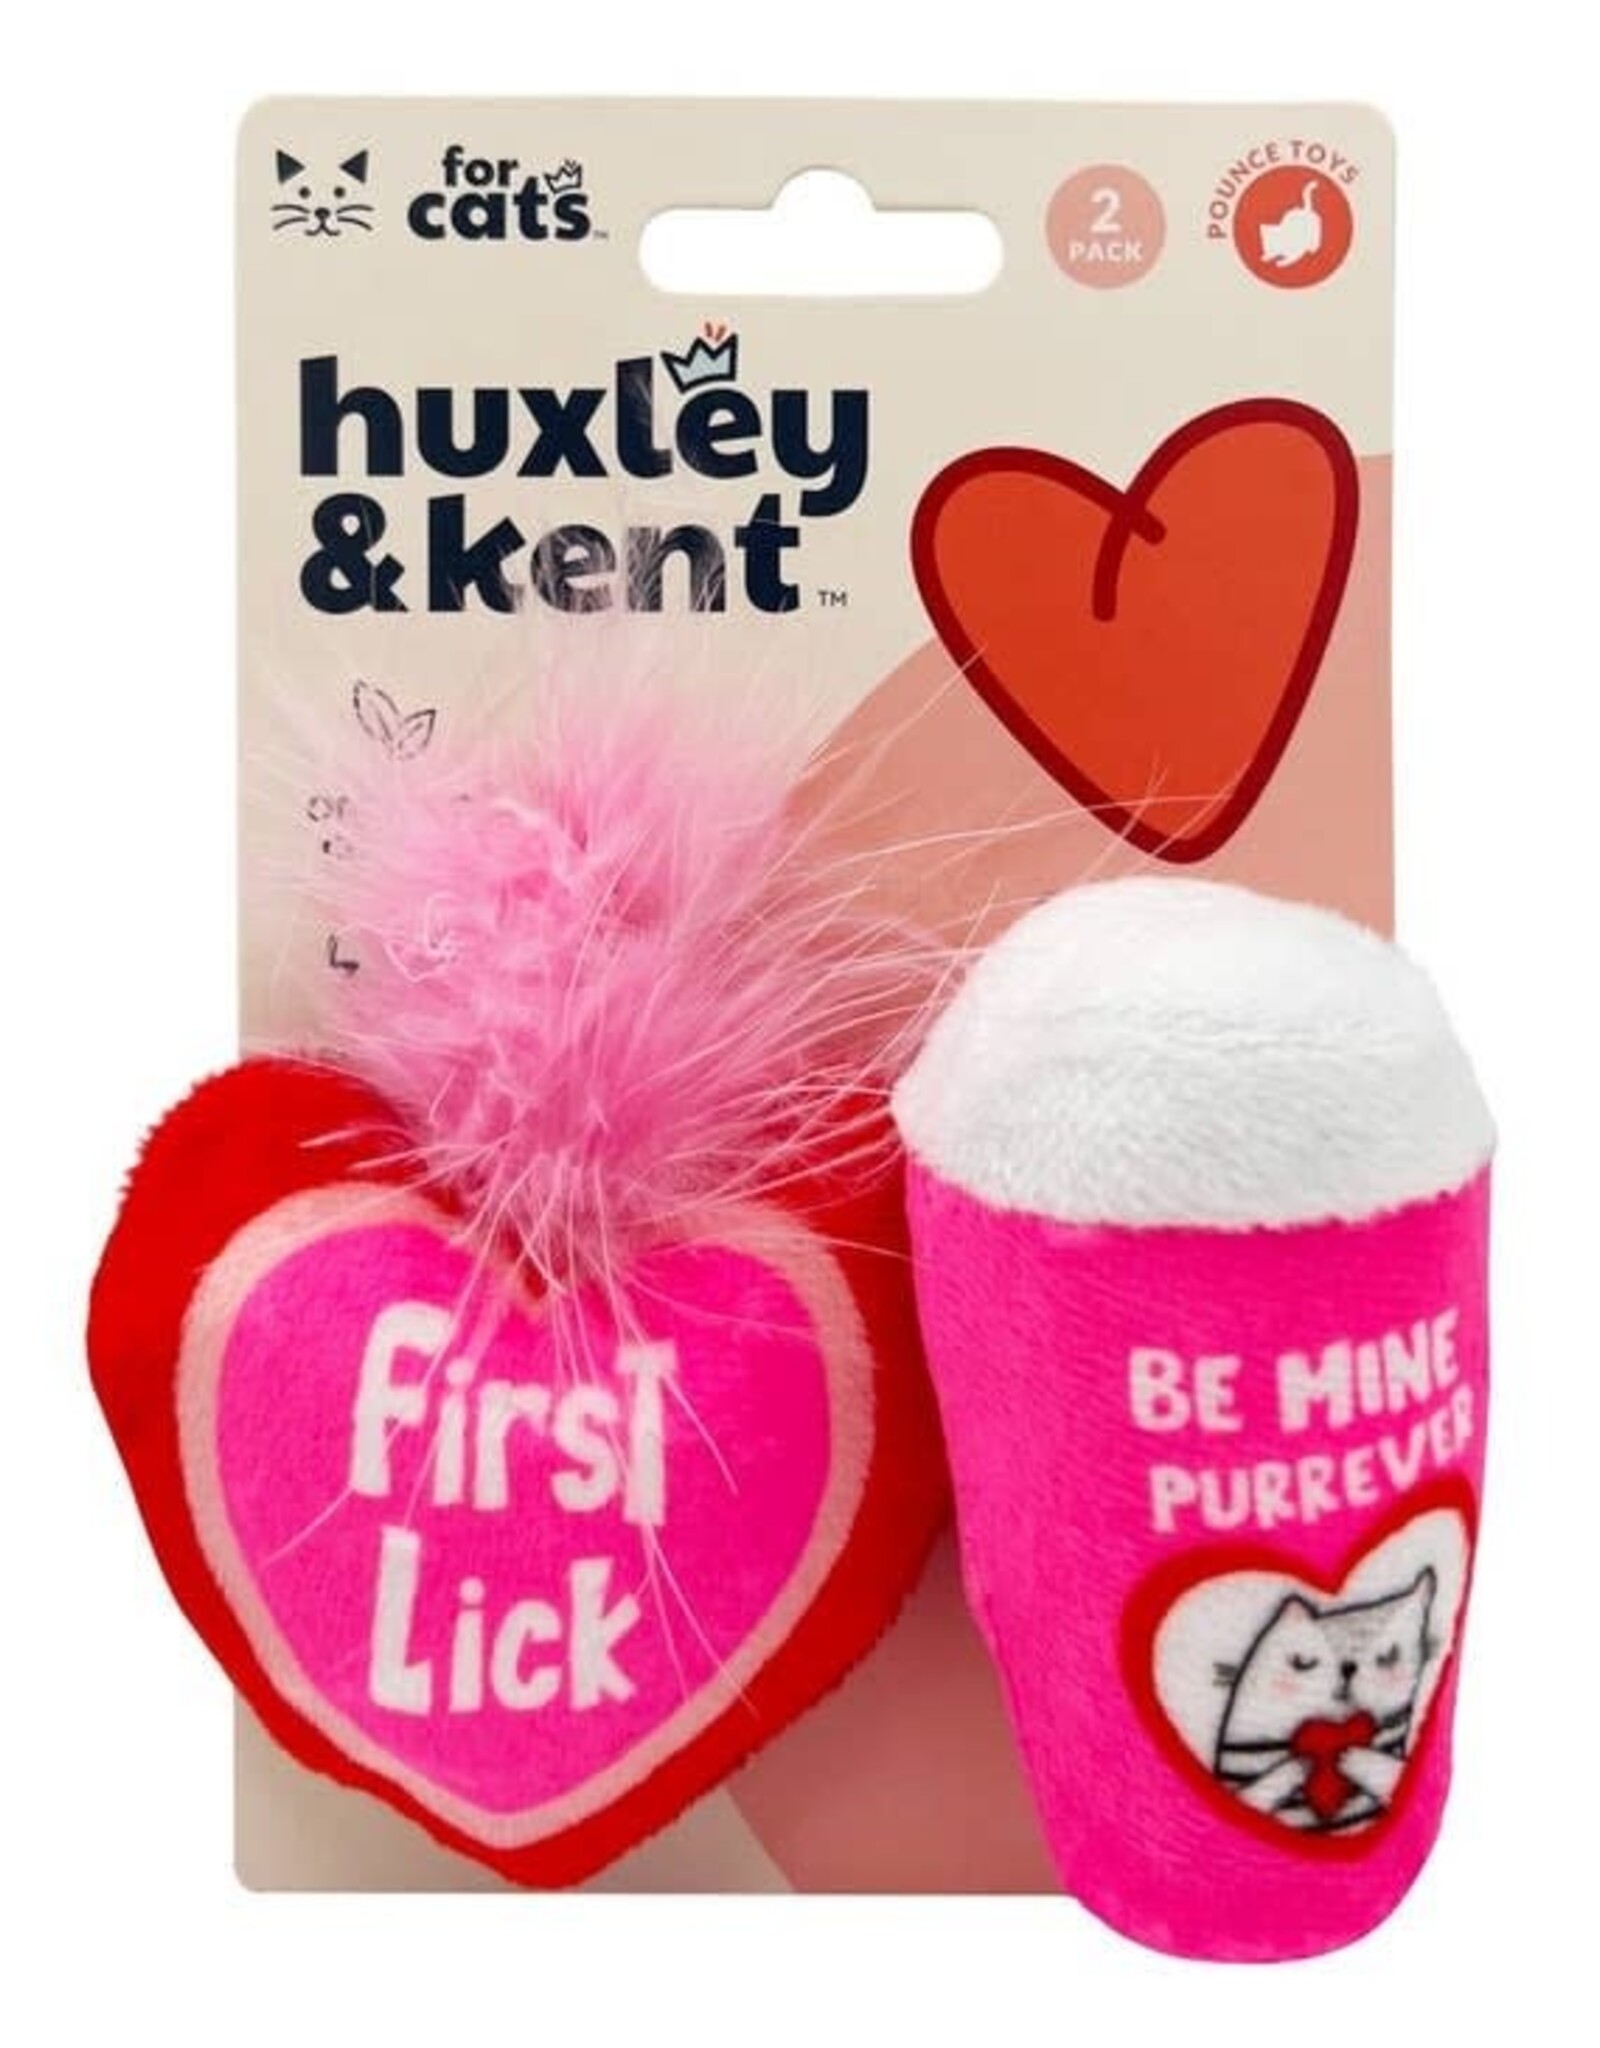 Huxley & Kent Huxley Kent First Lick Heart & Be Mine Coffee 2 Pack for Cats